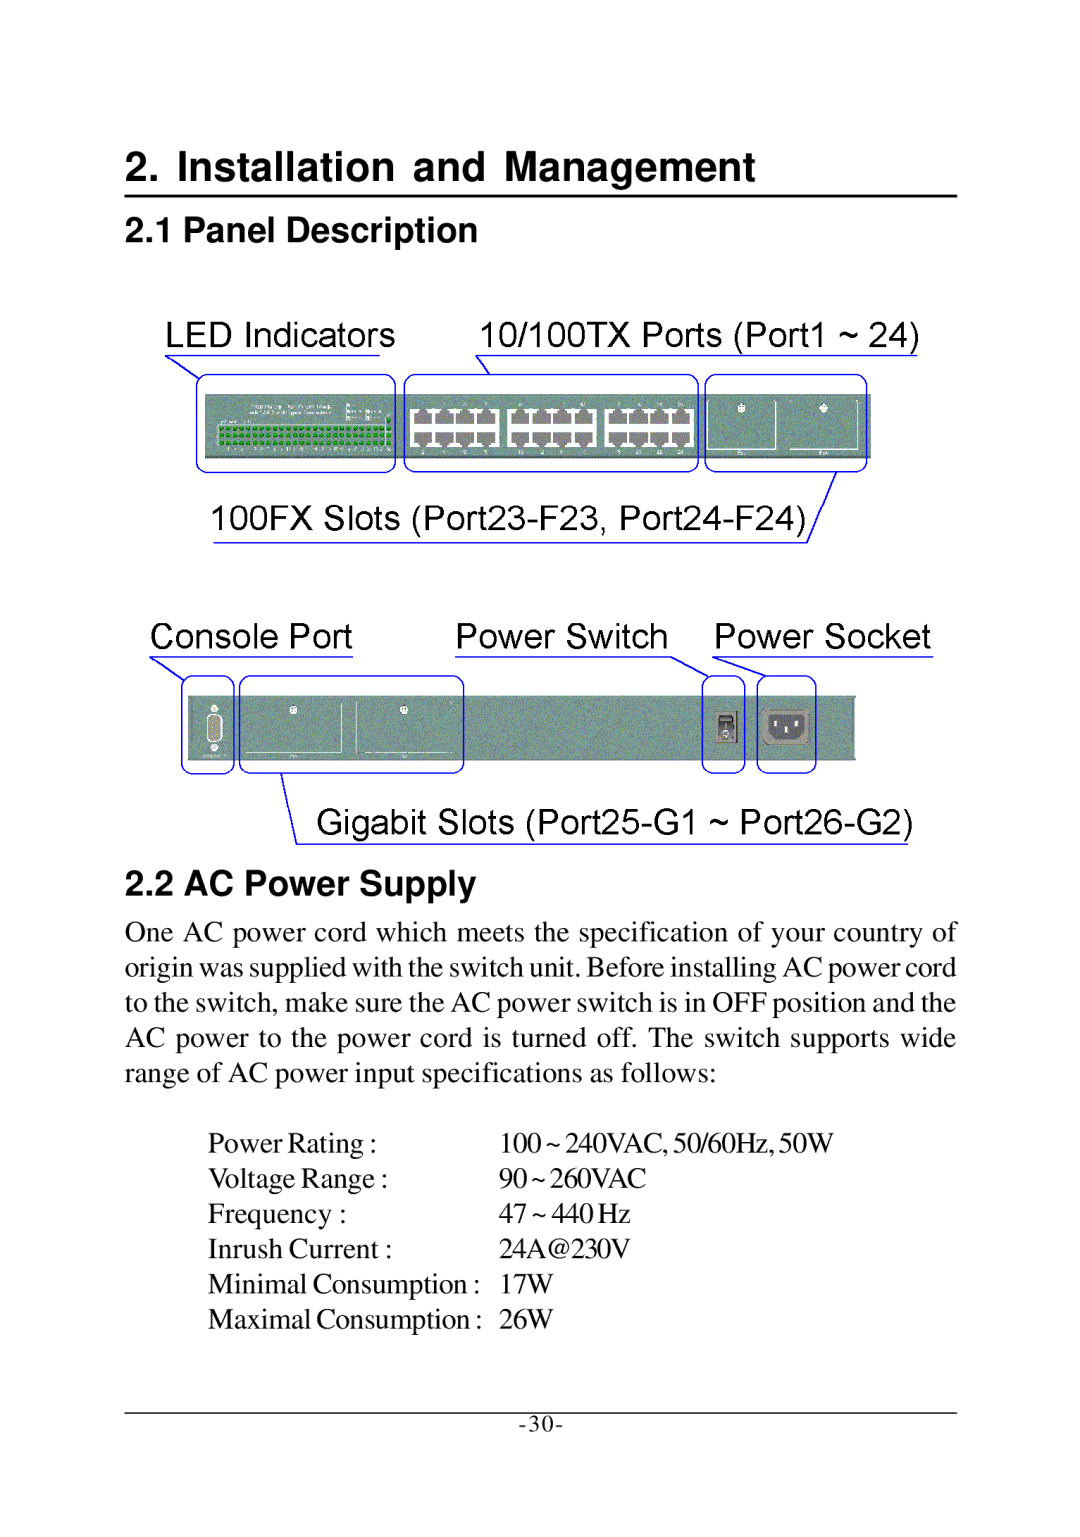 KTI Networks KS-2260 operation manual Installation and Management, Panel Description AC Power Supply 